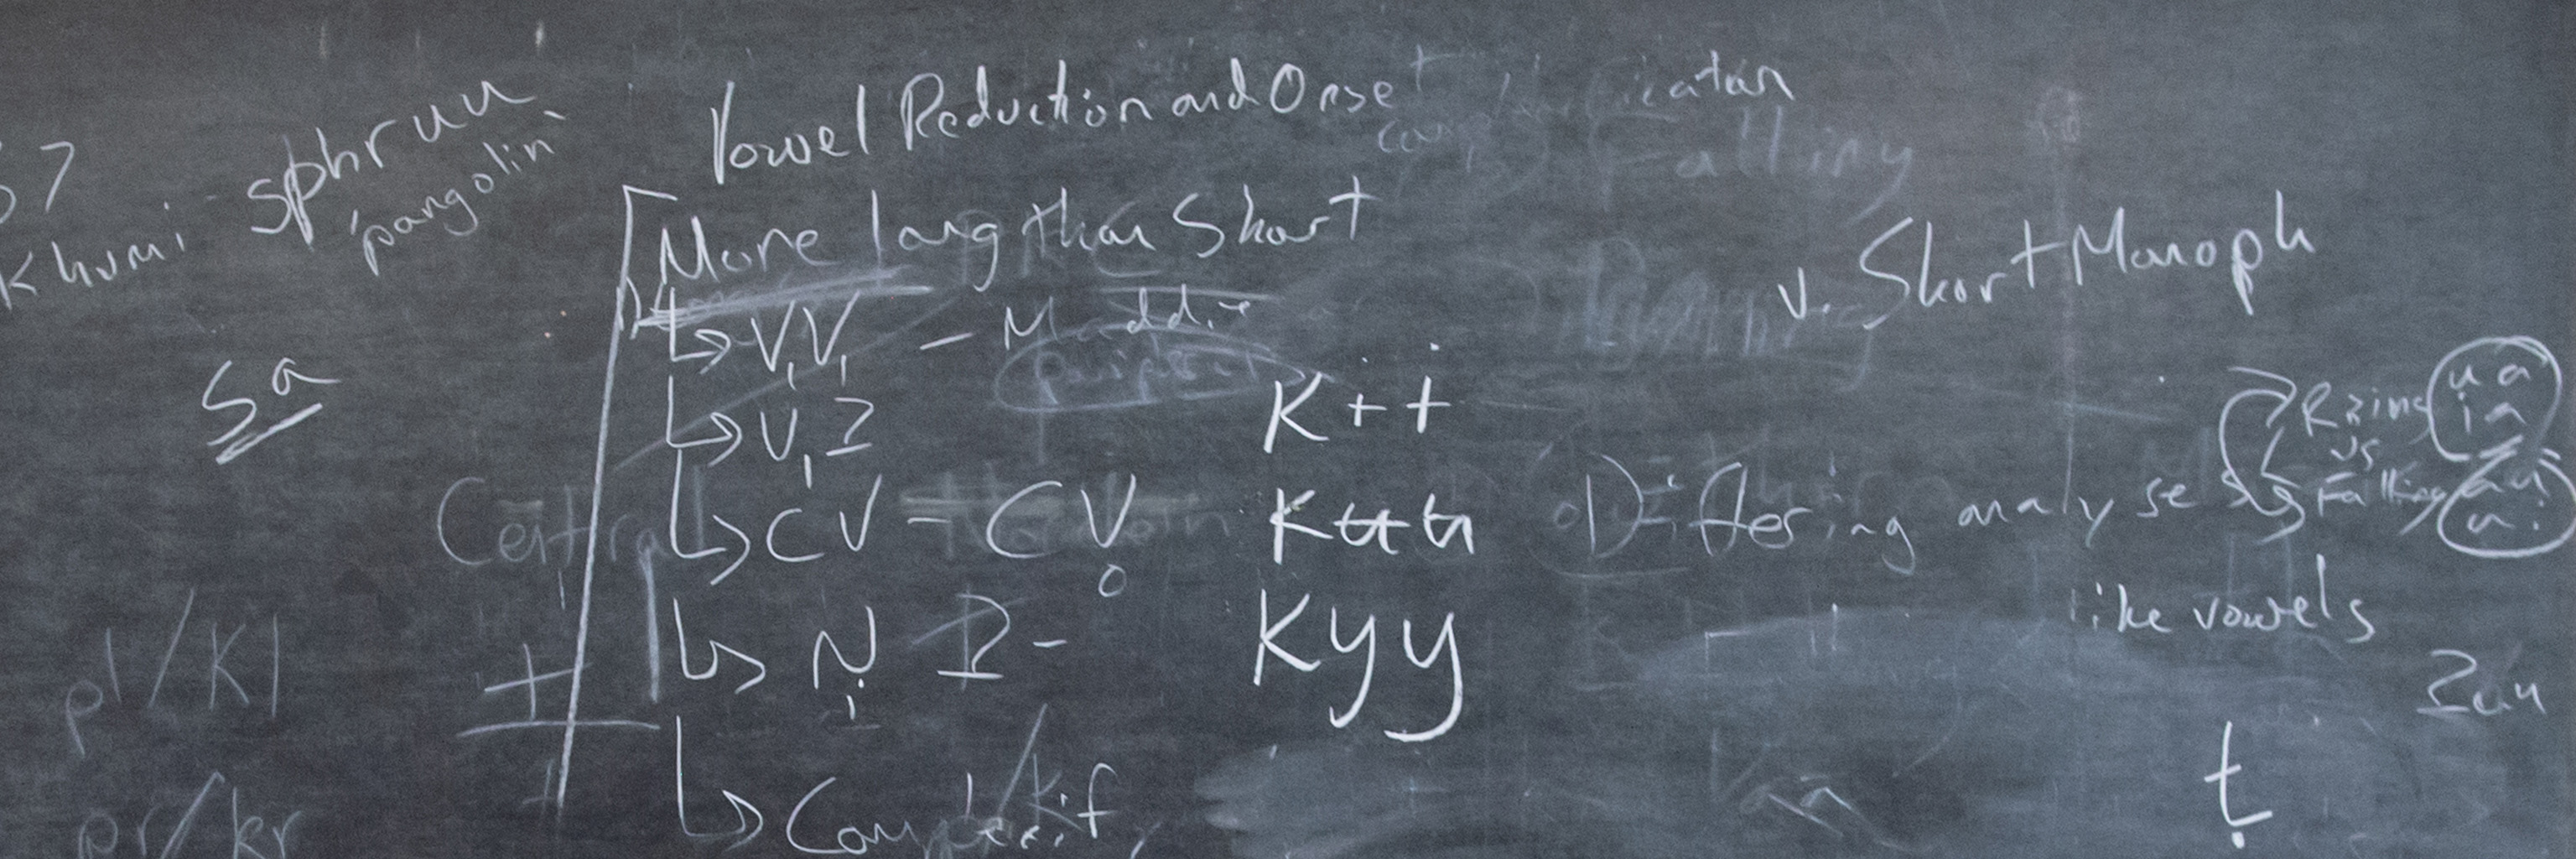 A blackboard covered in notes.